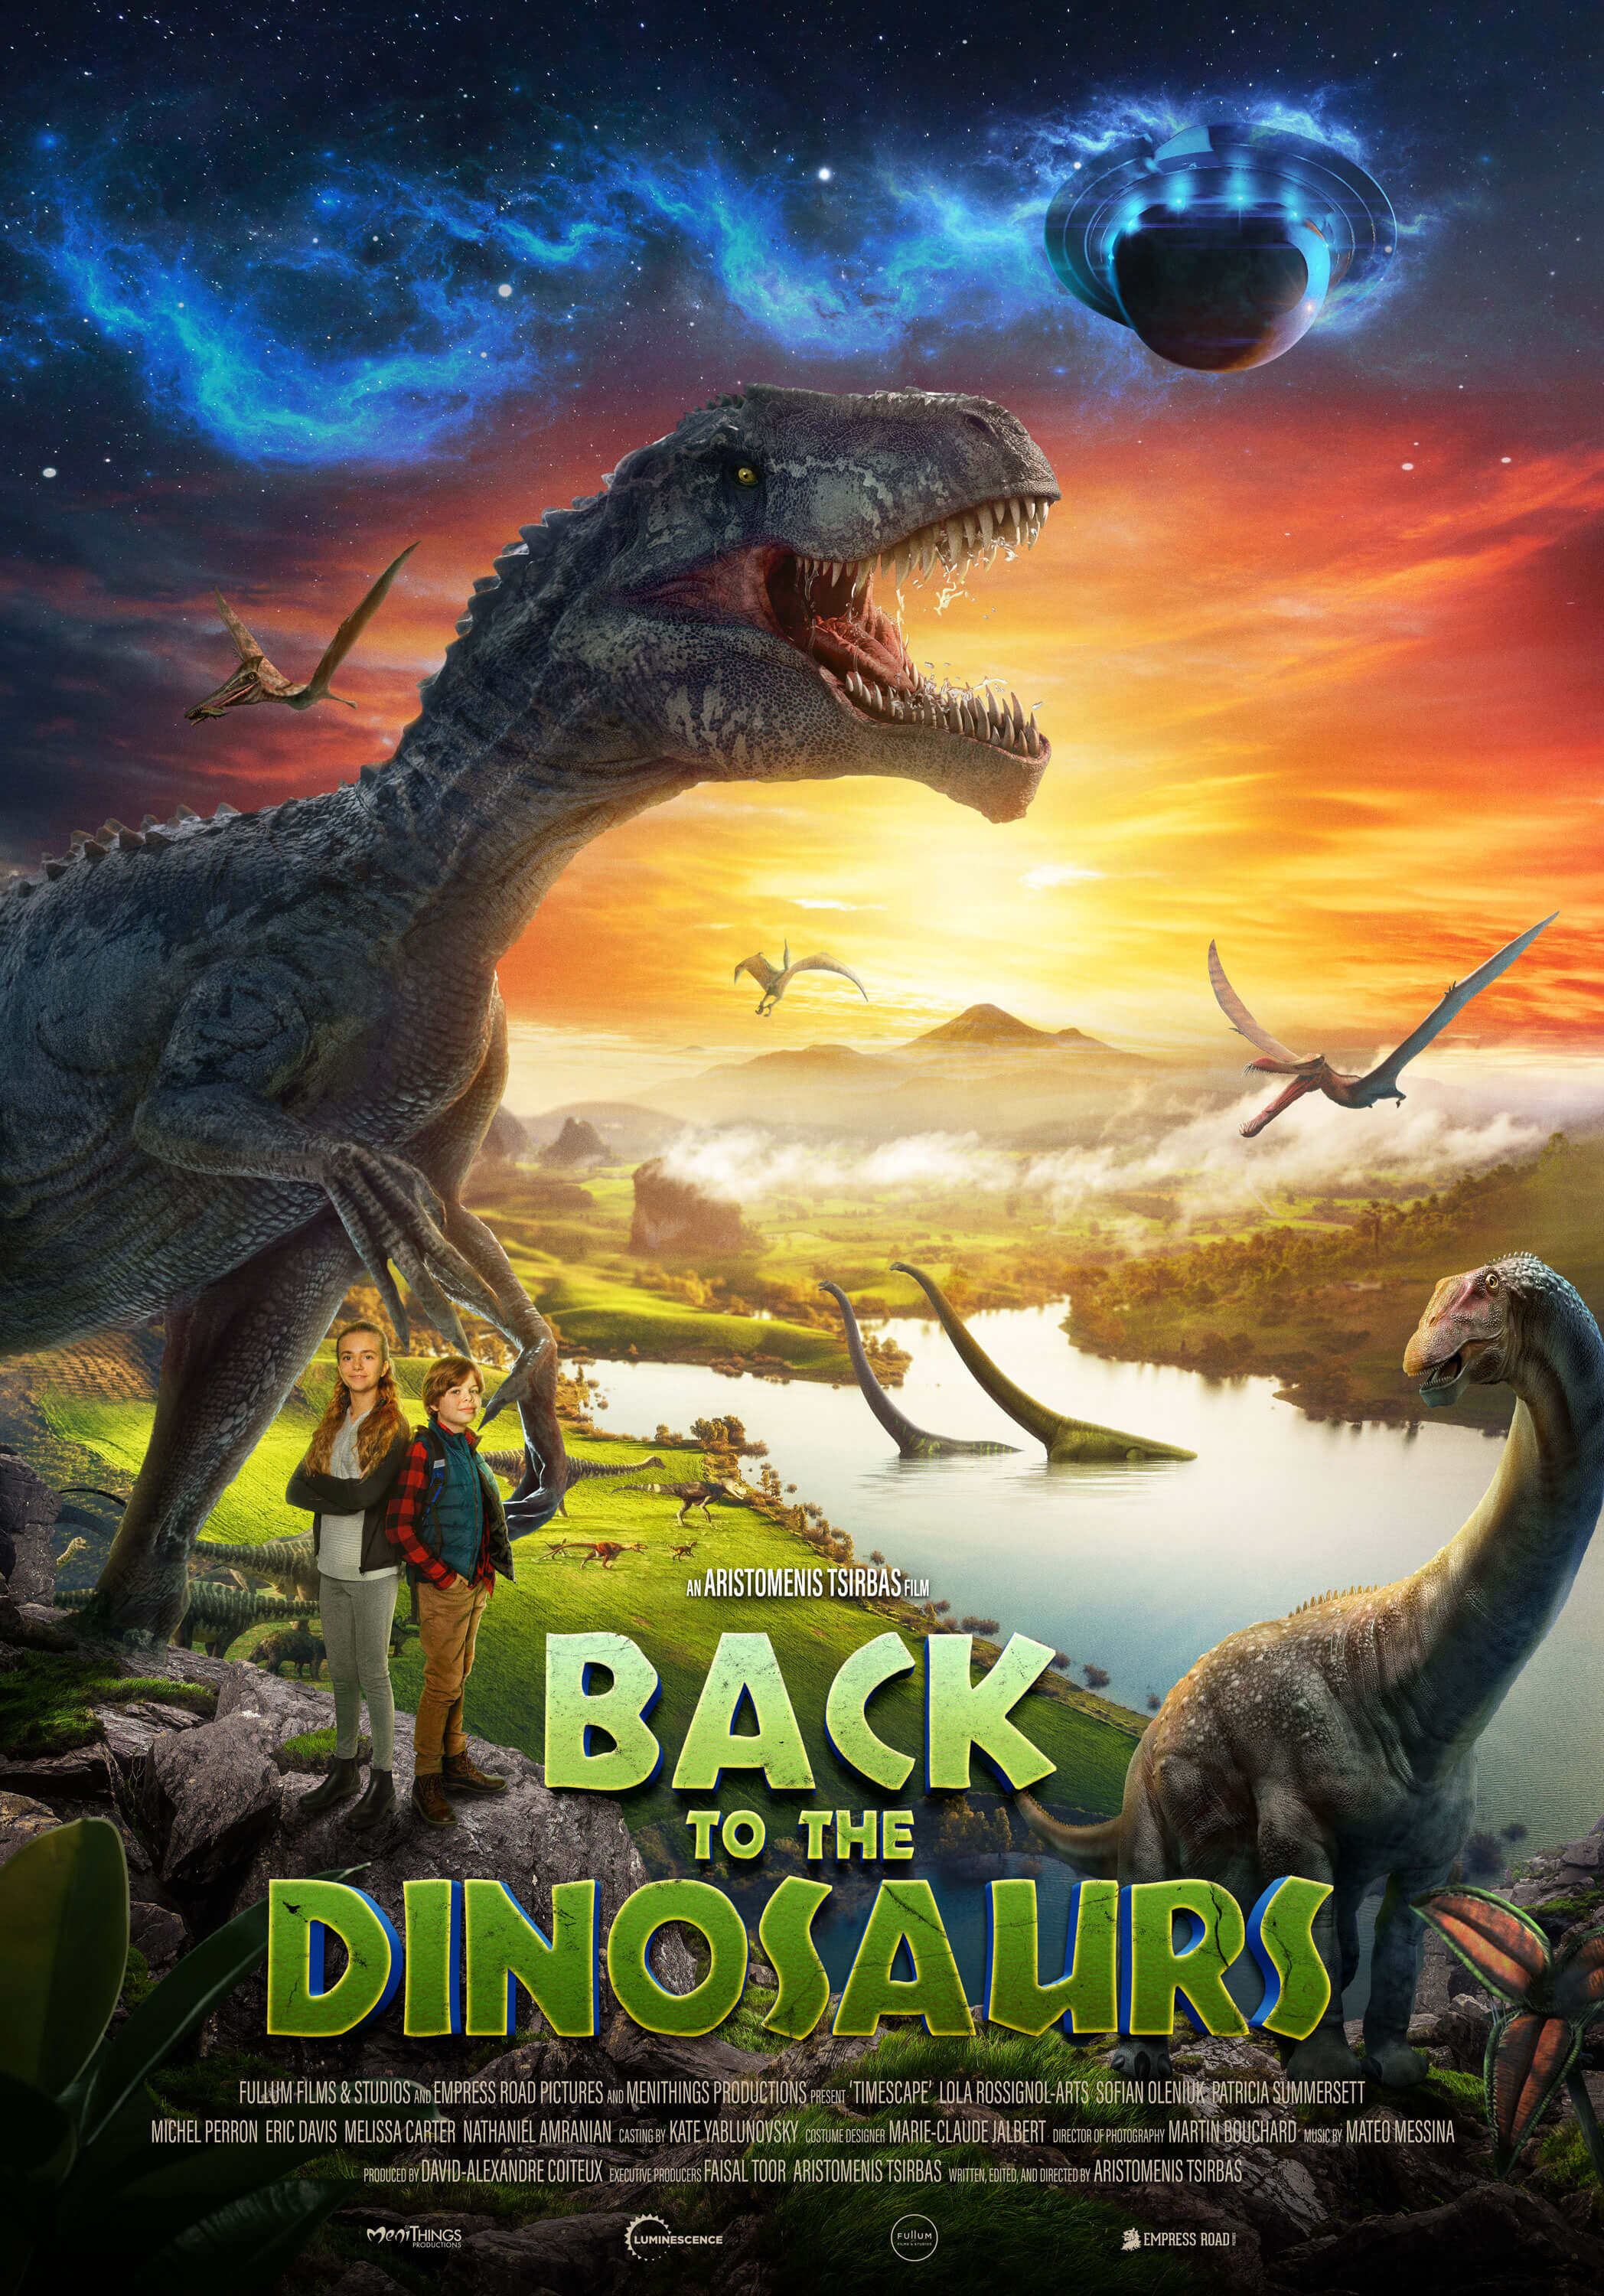 Back to the Dinosaurs